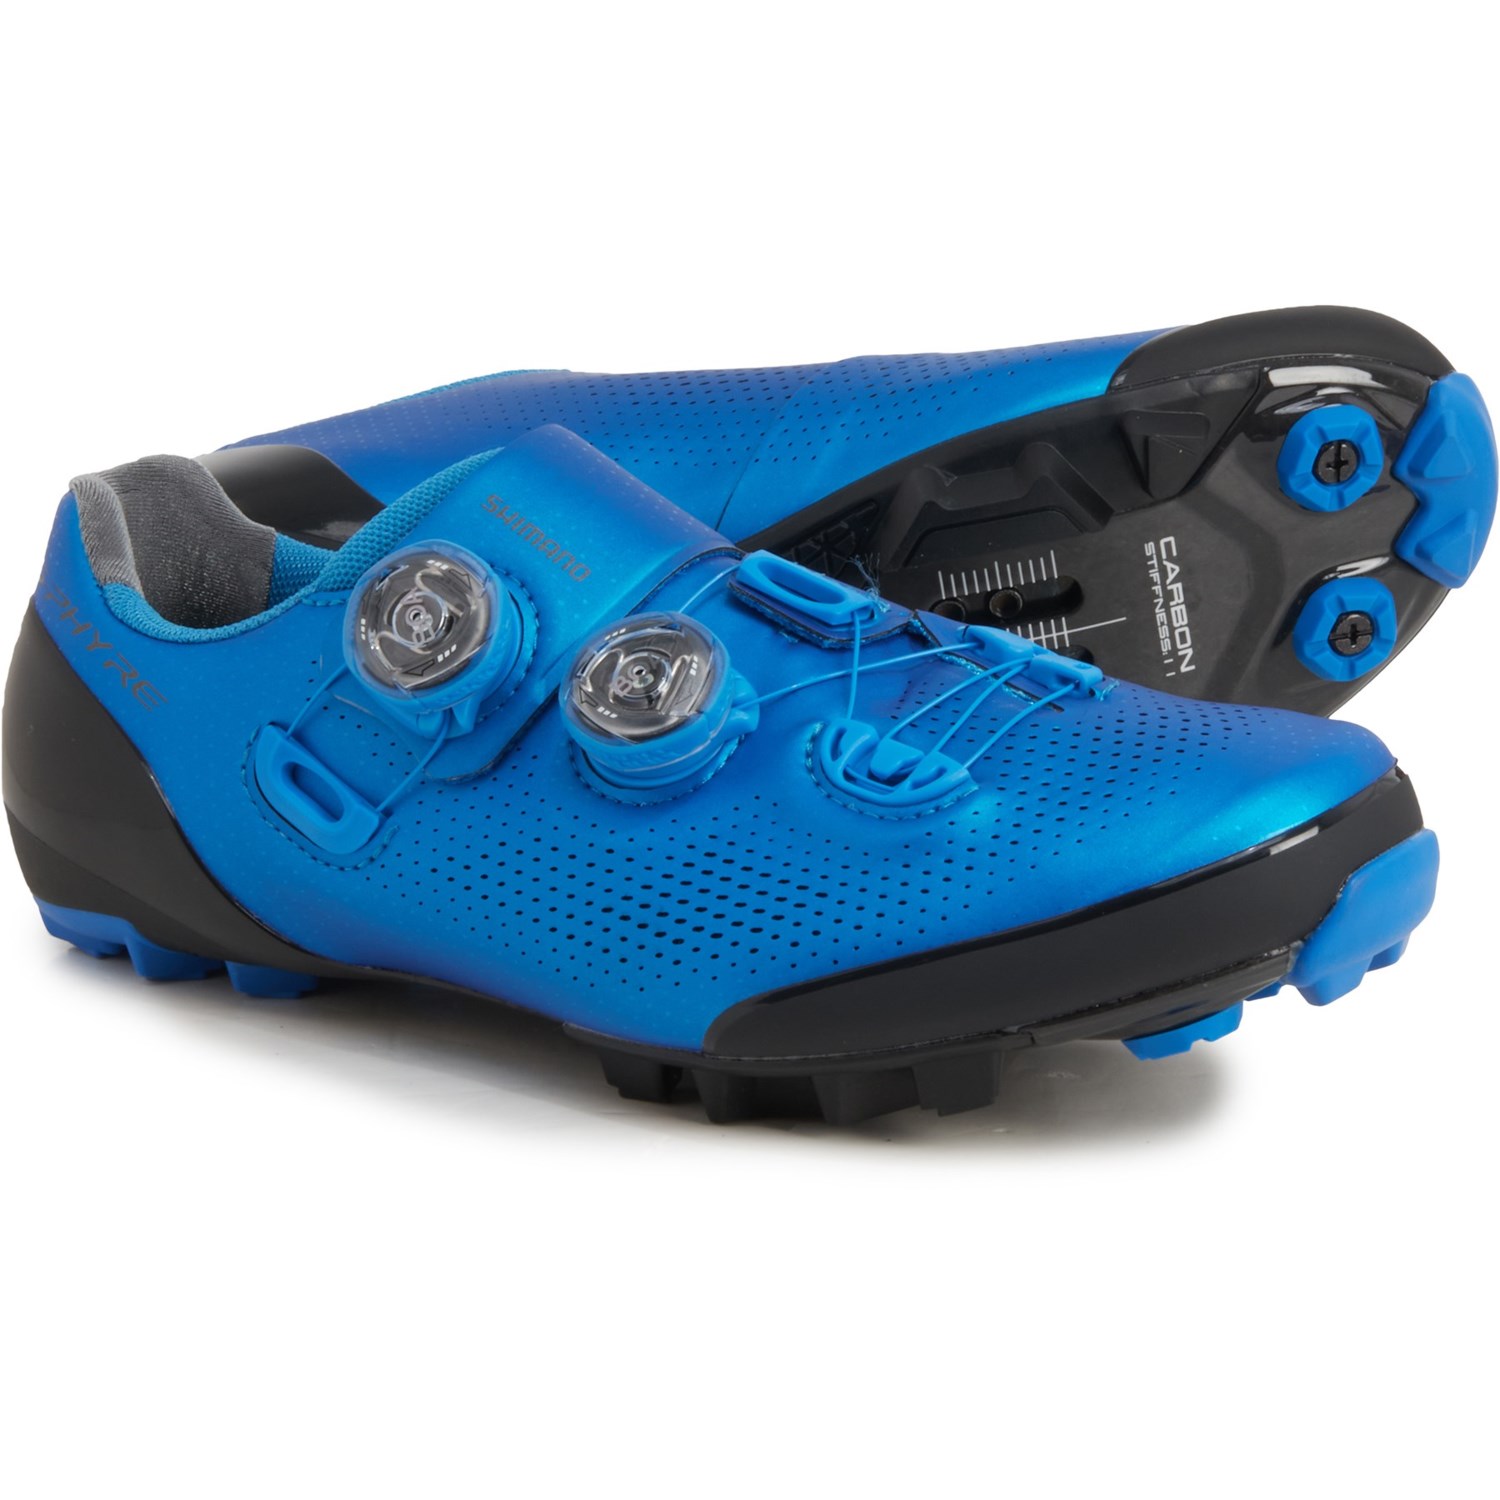 Shimano SH-XC901 S-PHYRE XC9 Cycling Shoes (For Men and Women